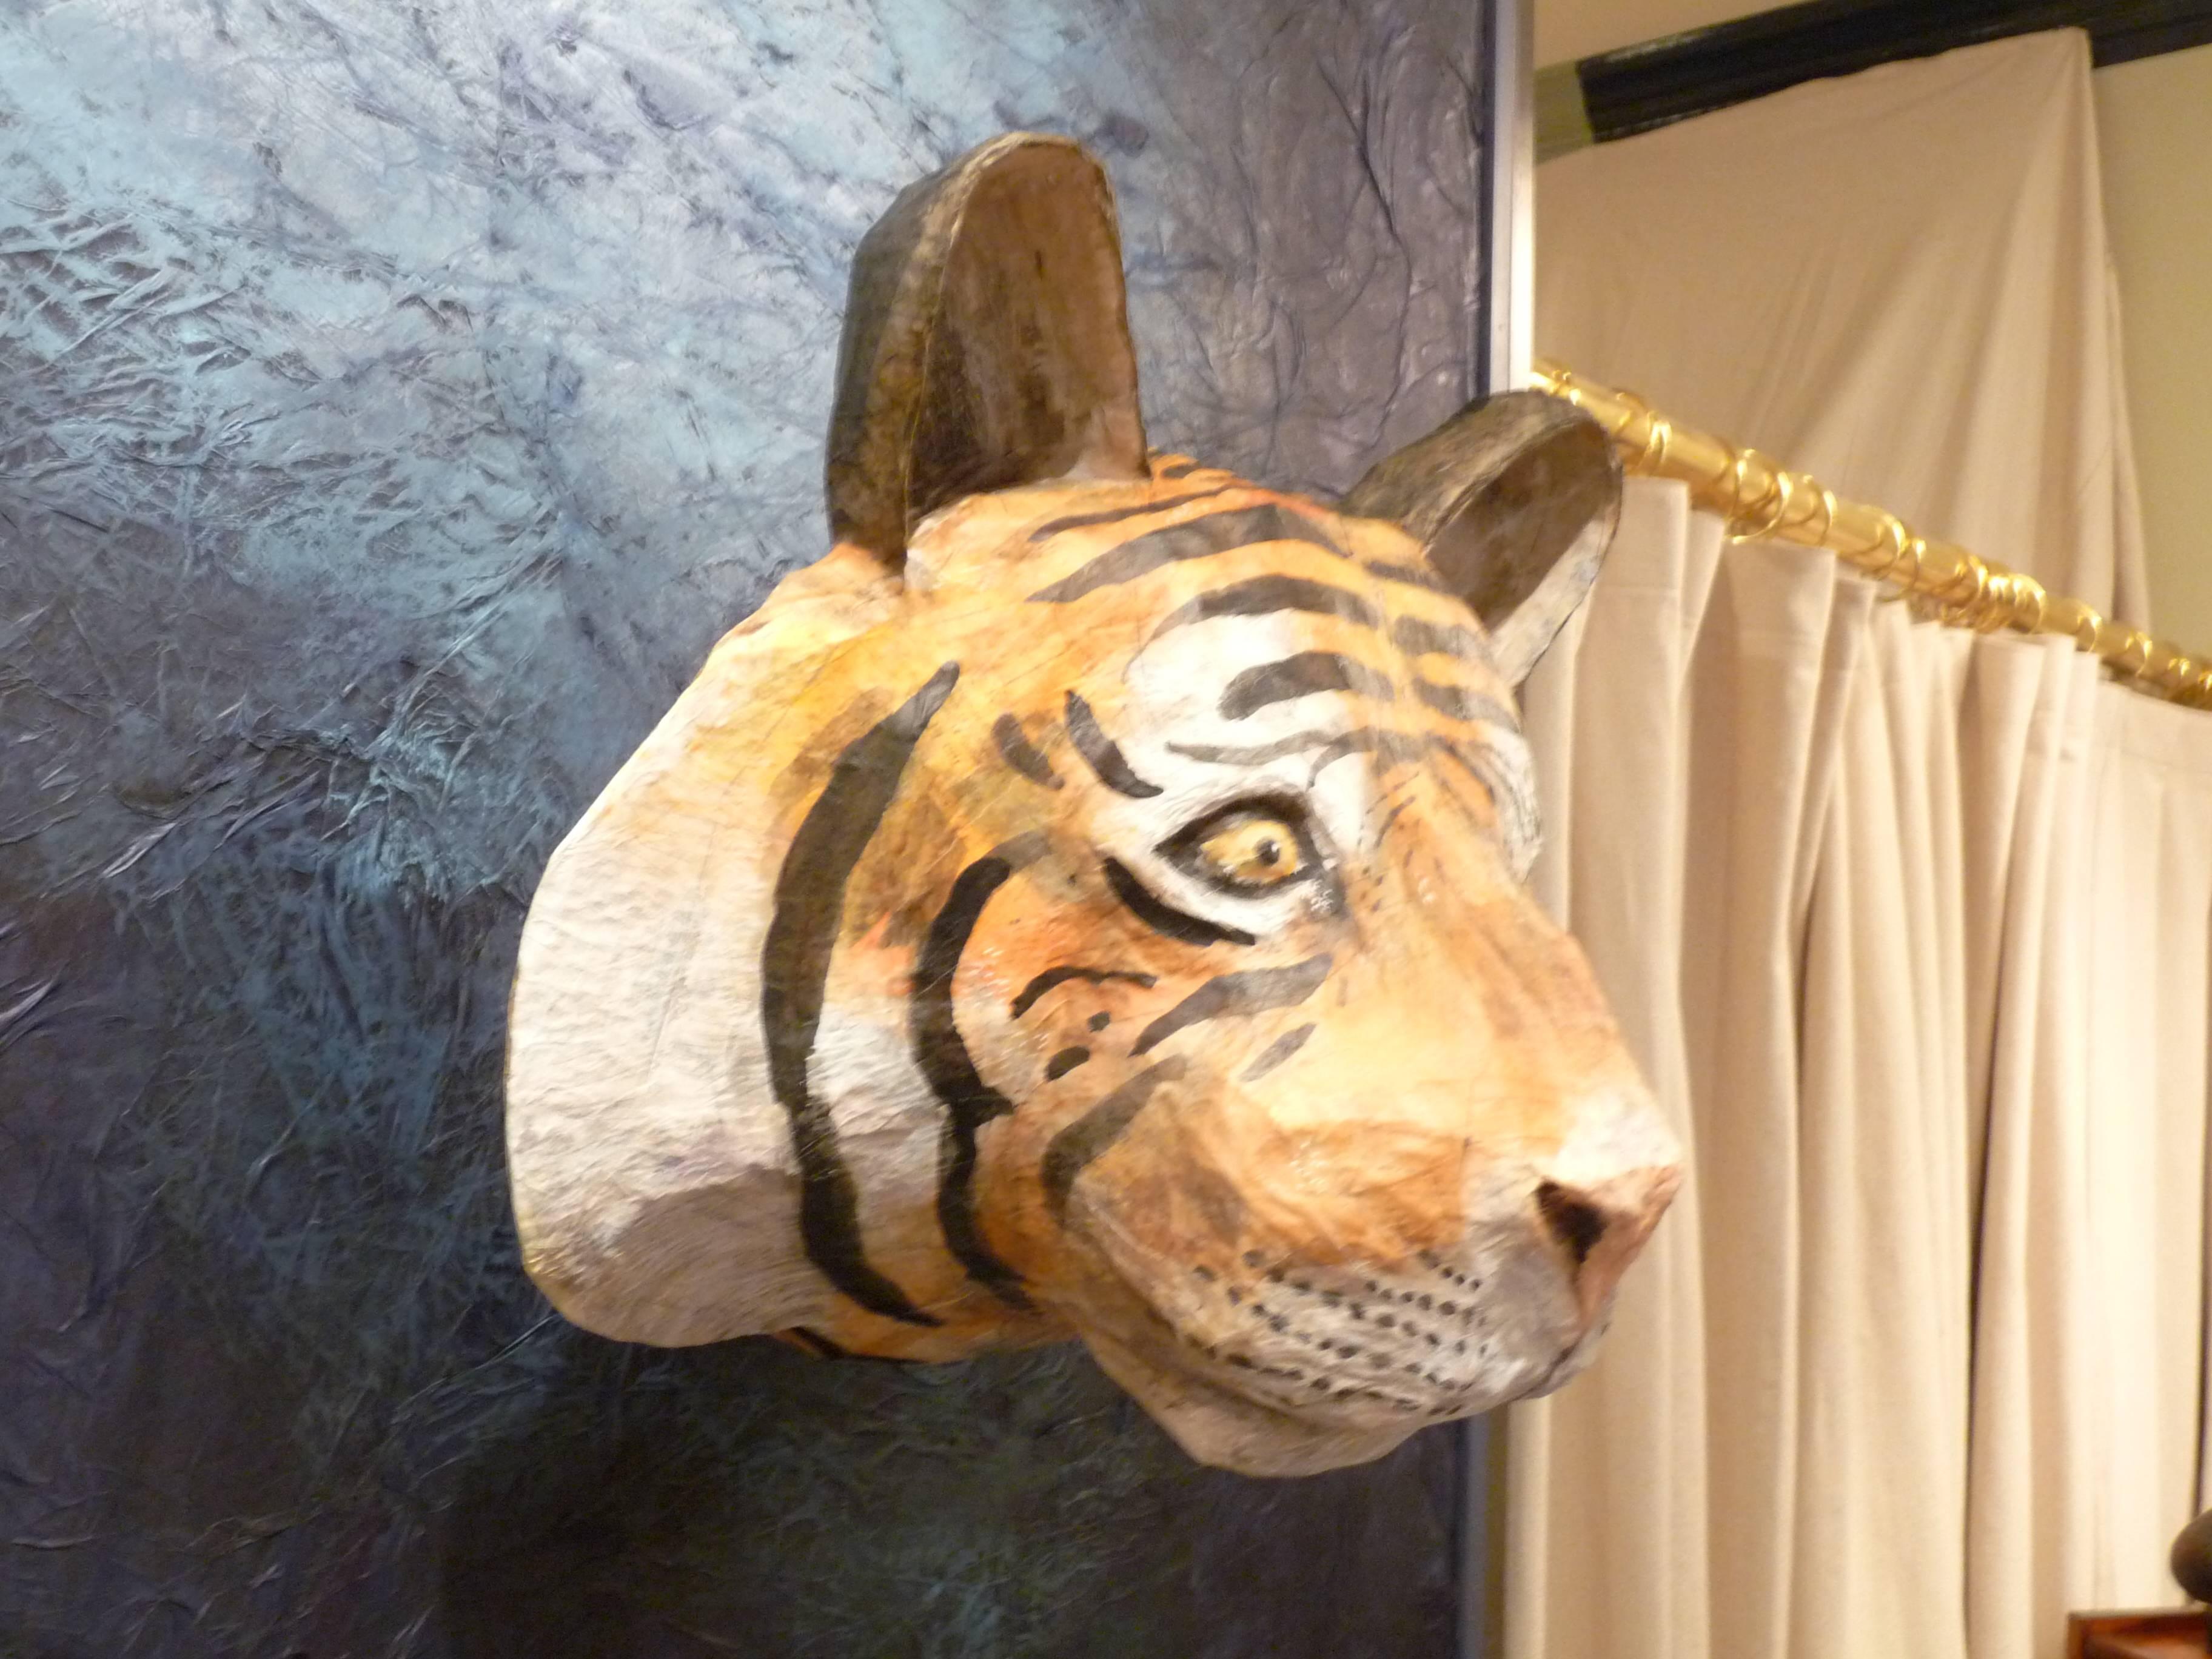 We love having this handsome tiger watch over us.  Hand-crafted out of paper mache by British artist Emily Warren, this eco-friendly mount is a whimsical addition to any living space.